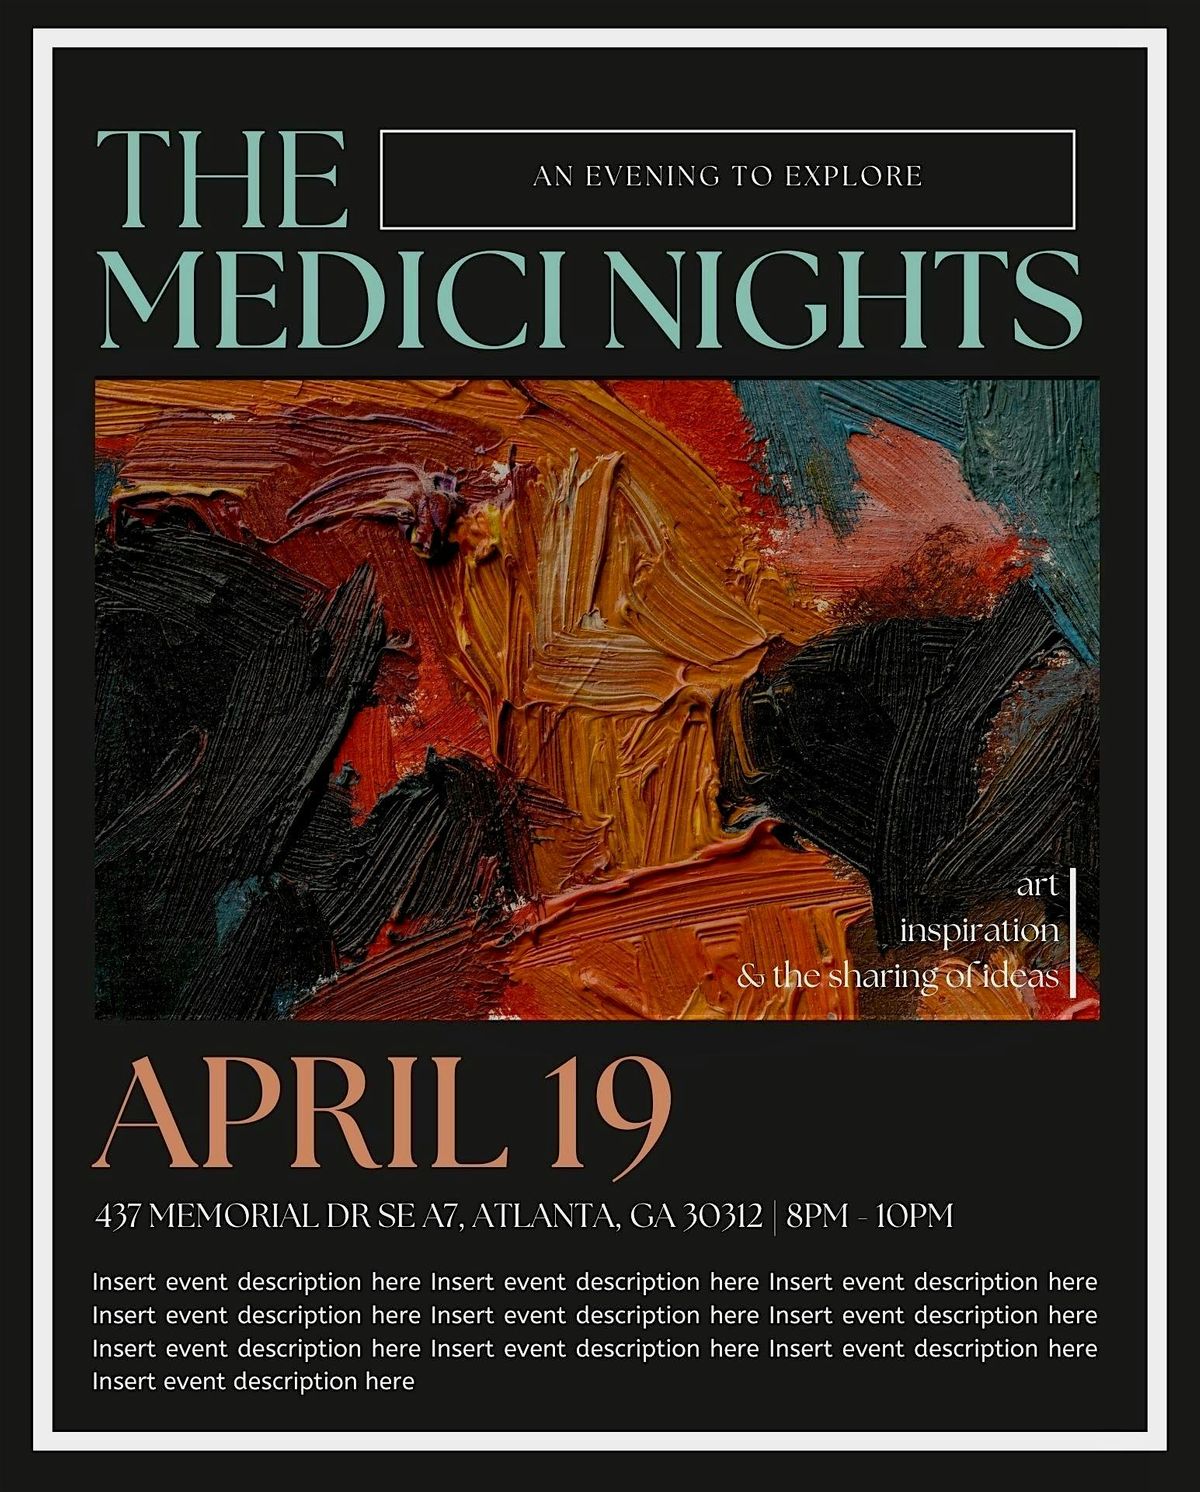 The Medici Nights: An Evening to Explore